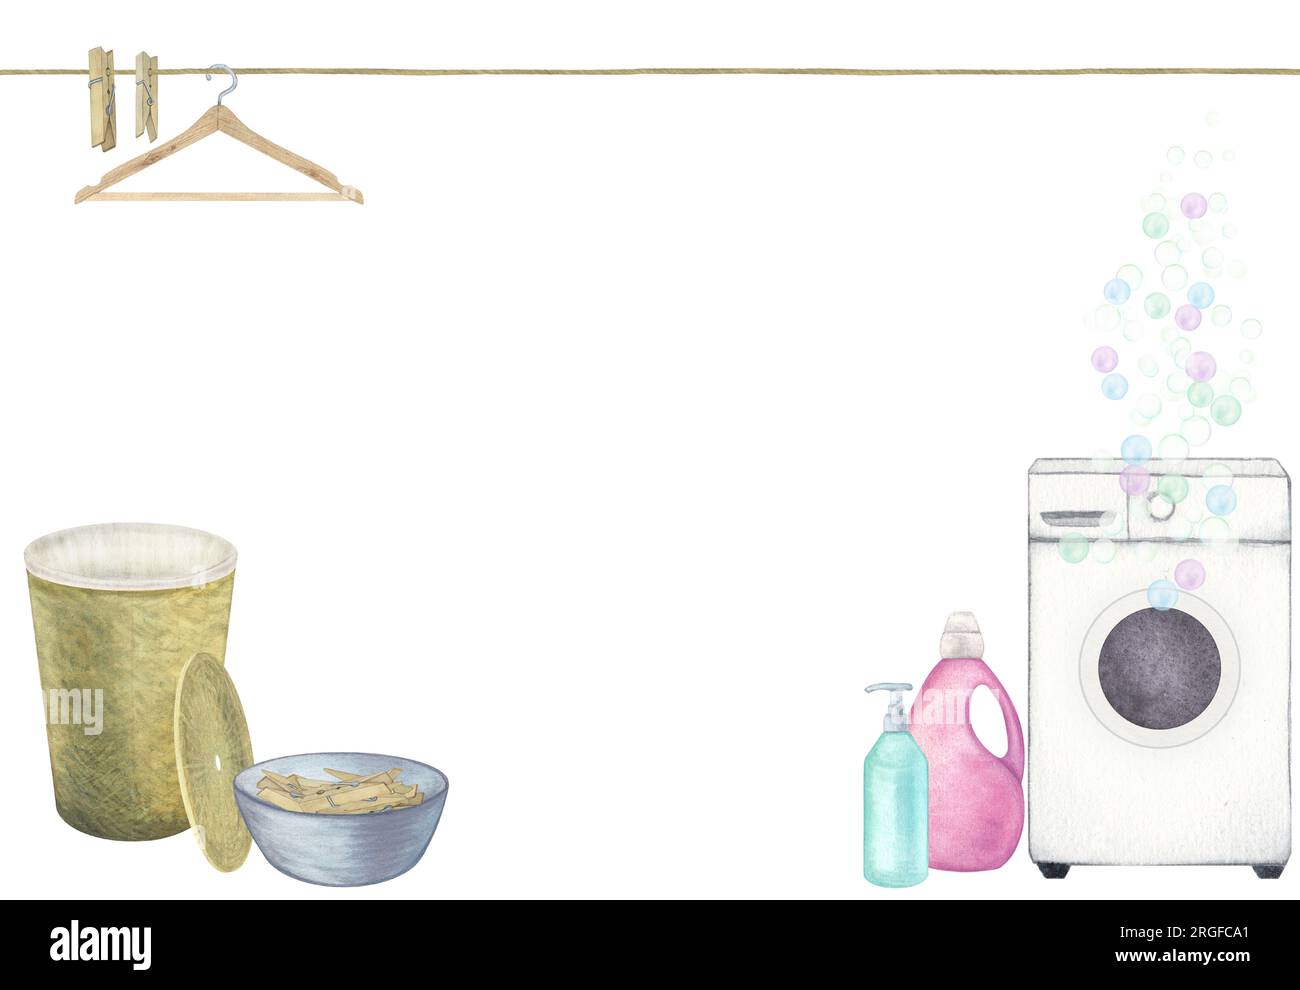 Laundry. Composition with washing machine, basket, basin, washing gel, powder, soap, hanger and clothespins. Watercolor illustration on a white backgr Stock Photo